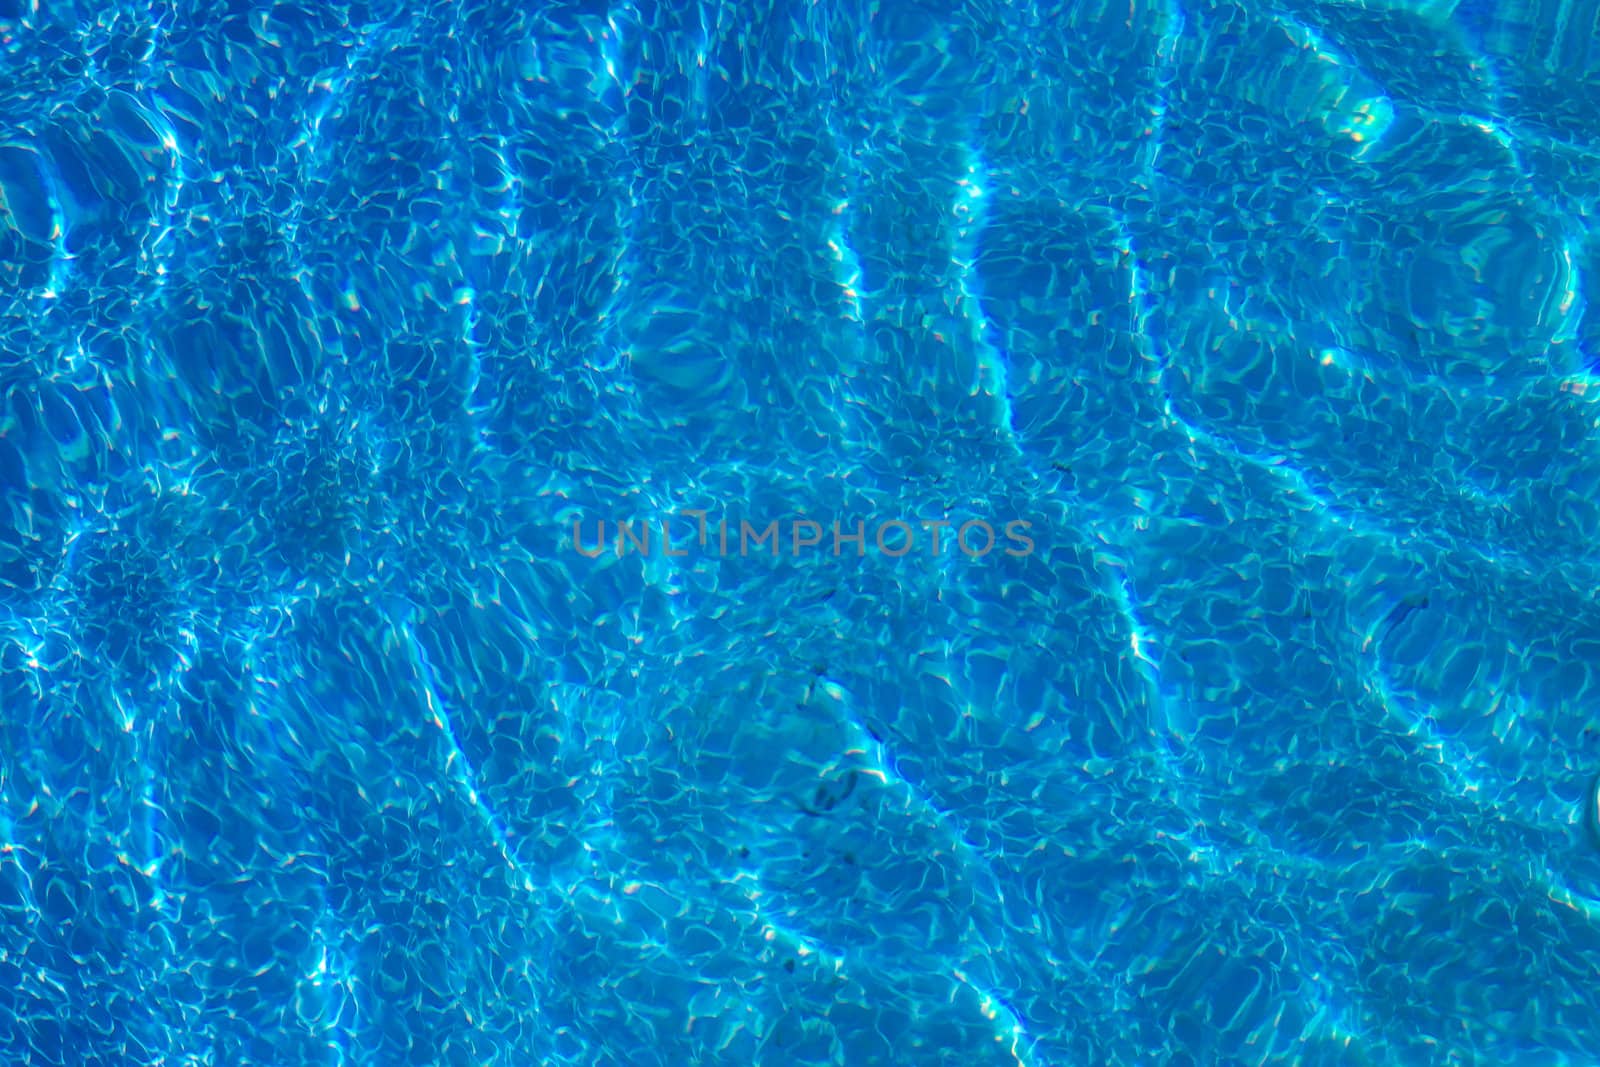 Water wave pattern of a swimming pool - Background